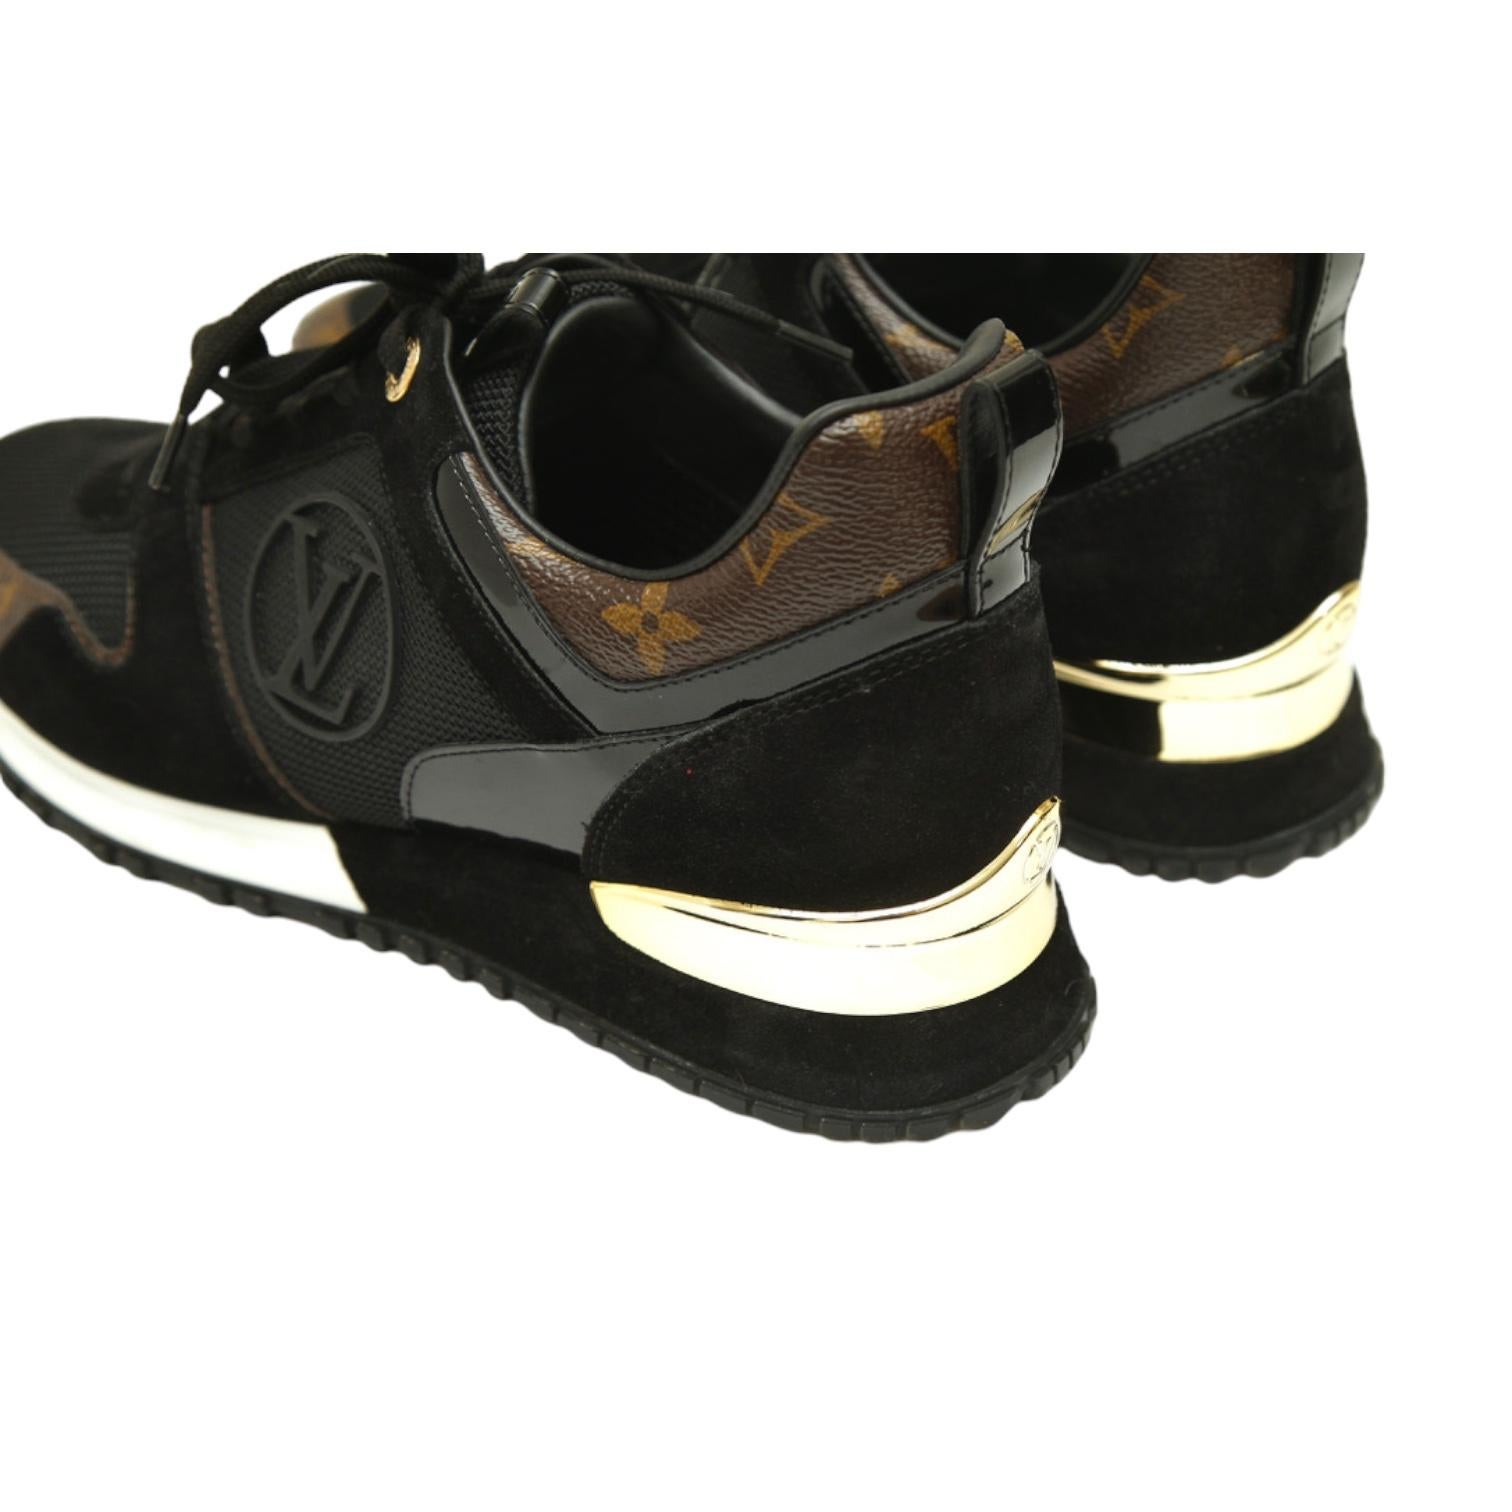 LOUIS VUITTON Sneakers RUN AWAY Black Suede Monogram Gold Lace Up Trainer Sz 38 For Sale 5